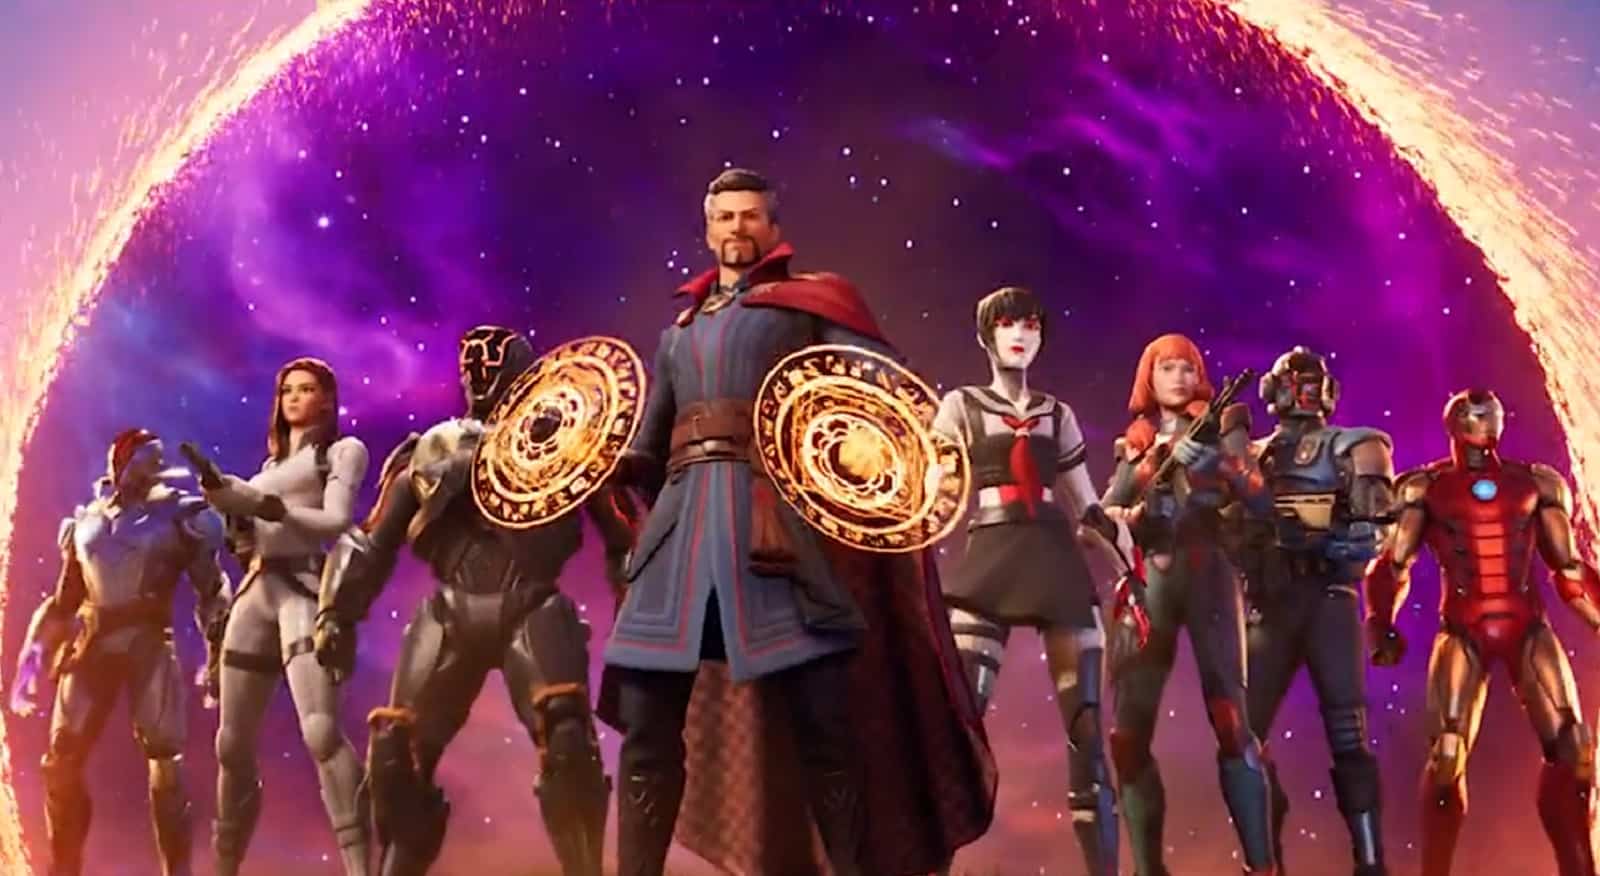 doctor strange and other battle pass skins in fortnite chapter 3